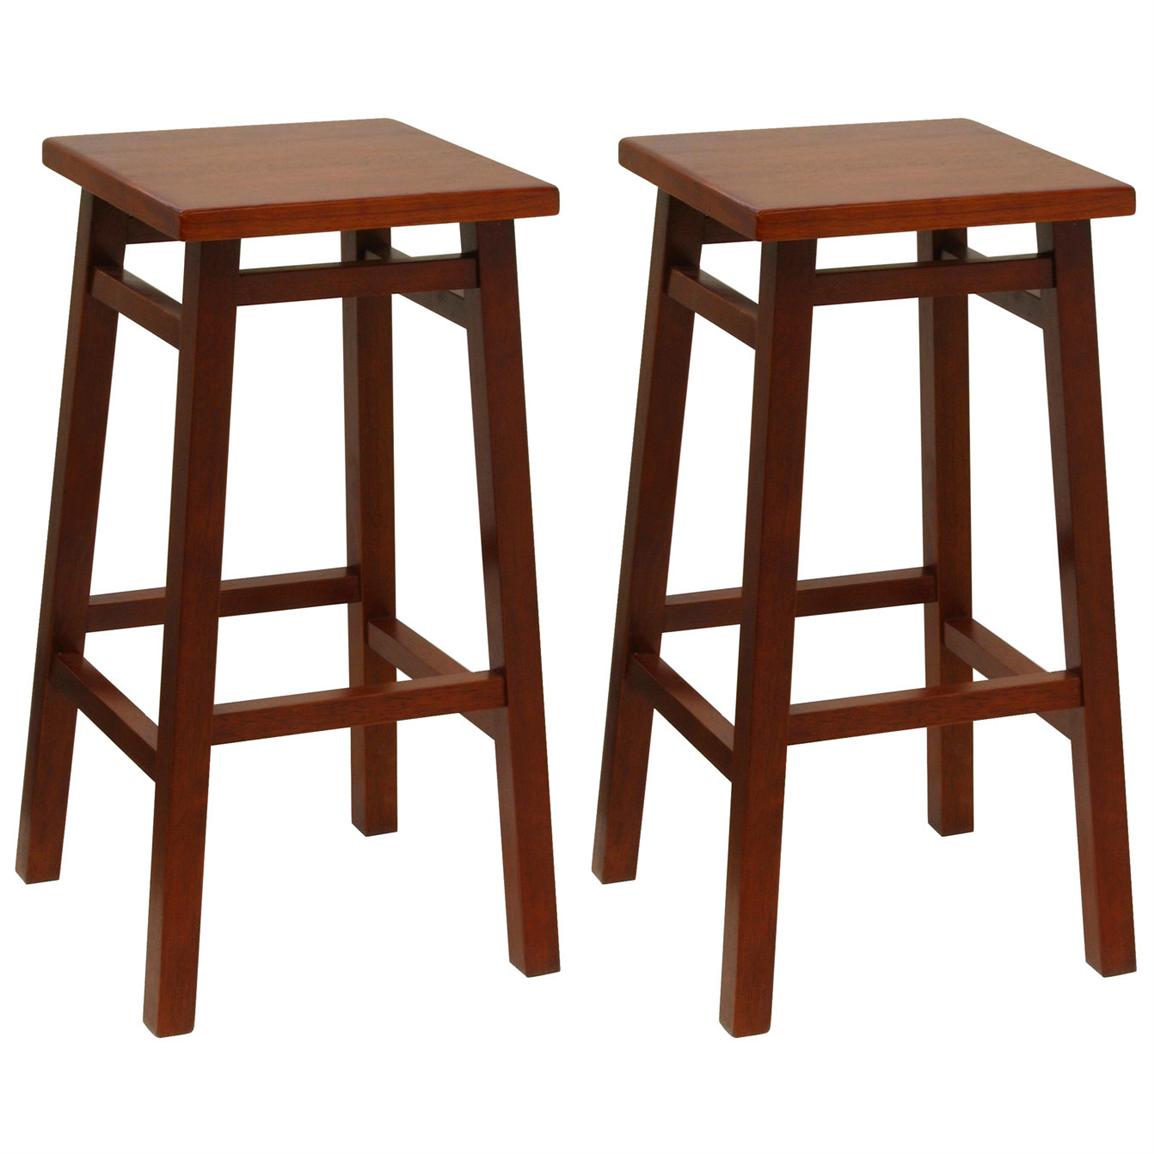 Winsome® 30 Walnut Finished Square Seat Bar Stools Set Of 2 151330 Kitchen And Dining At